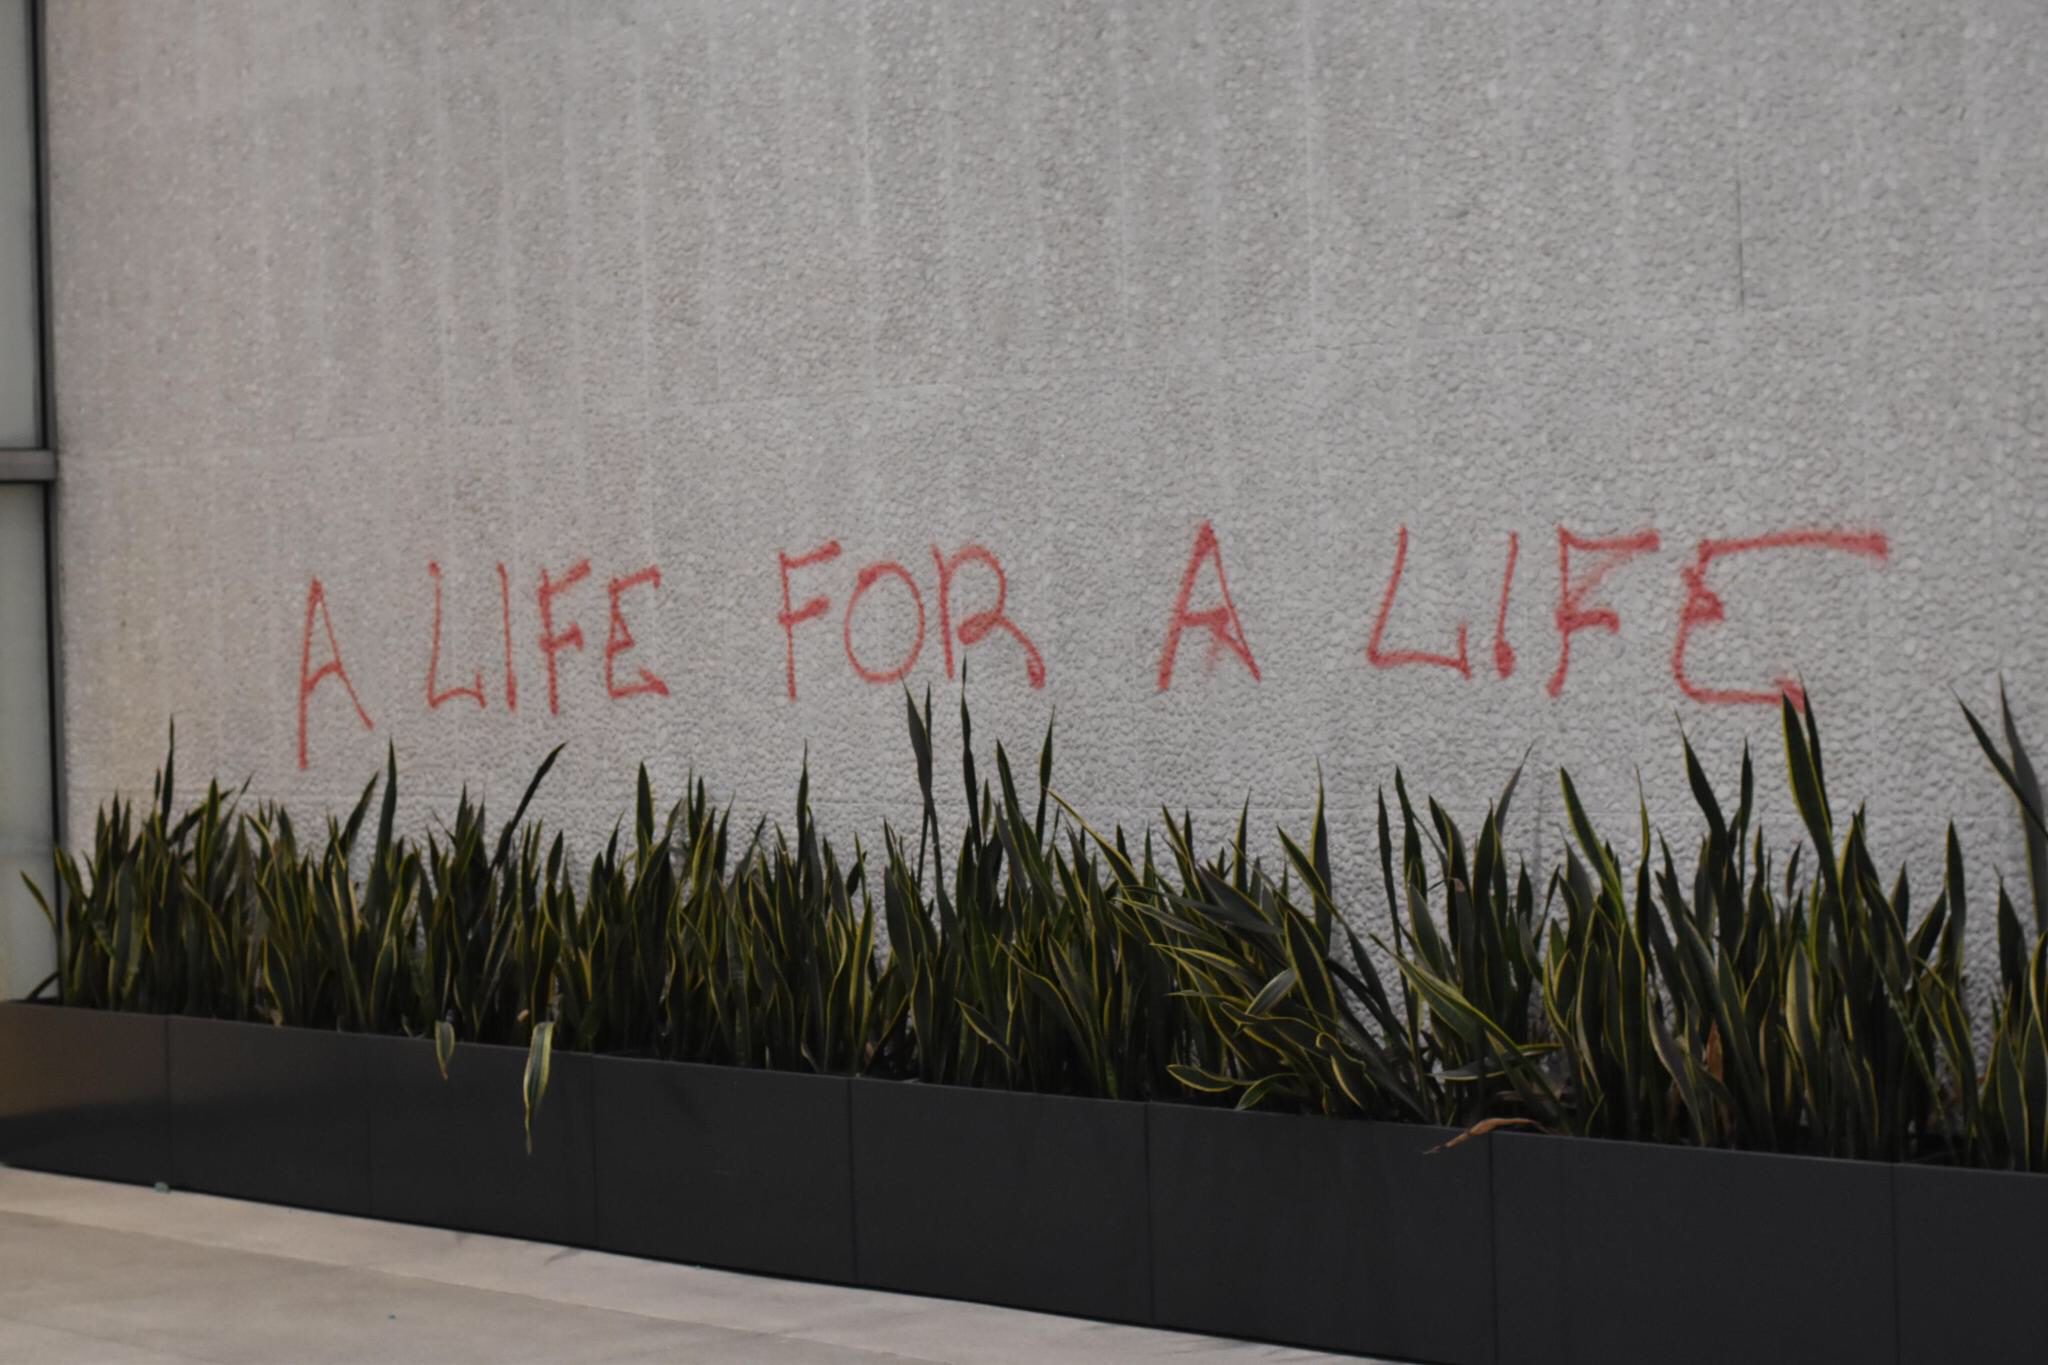 Onto a concrete wall in front of grass, A LIFE LIFE FOR A LIFE" is tagged in red spray paint.